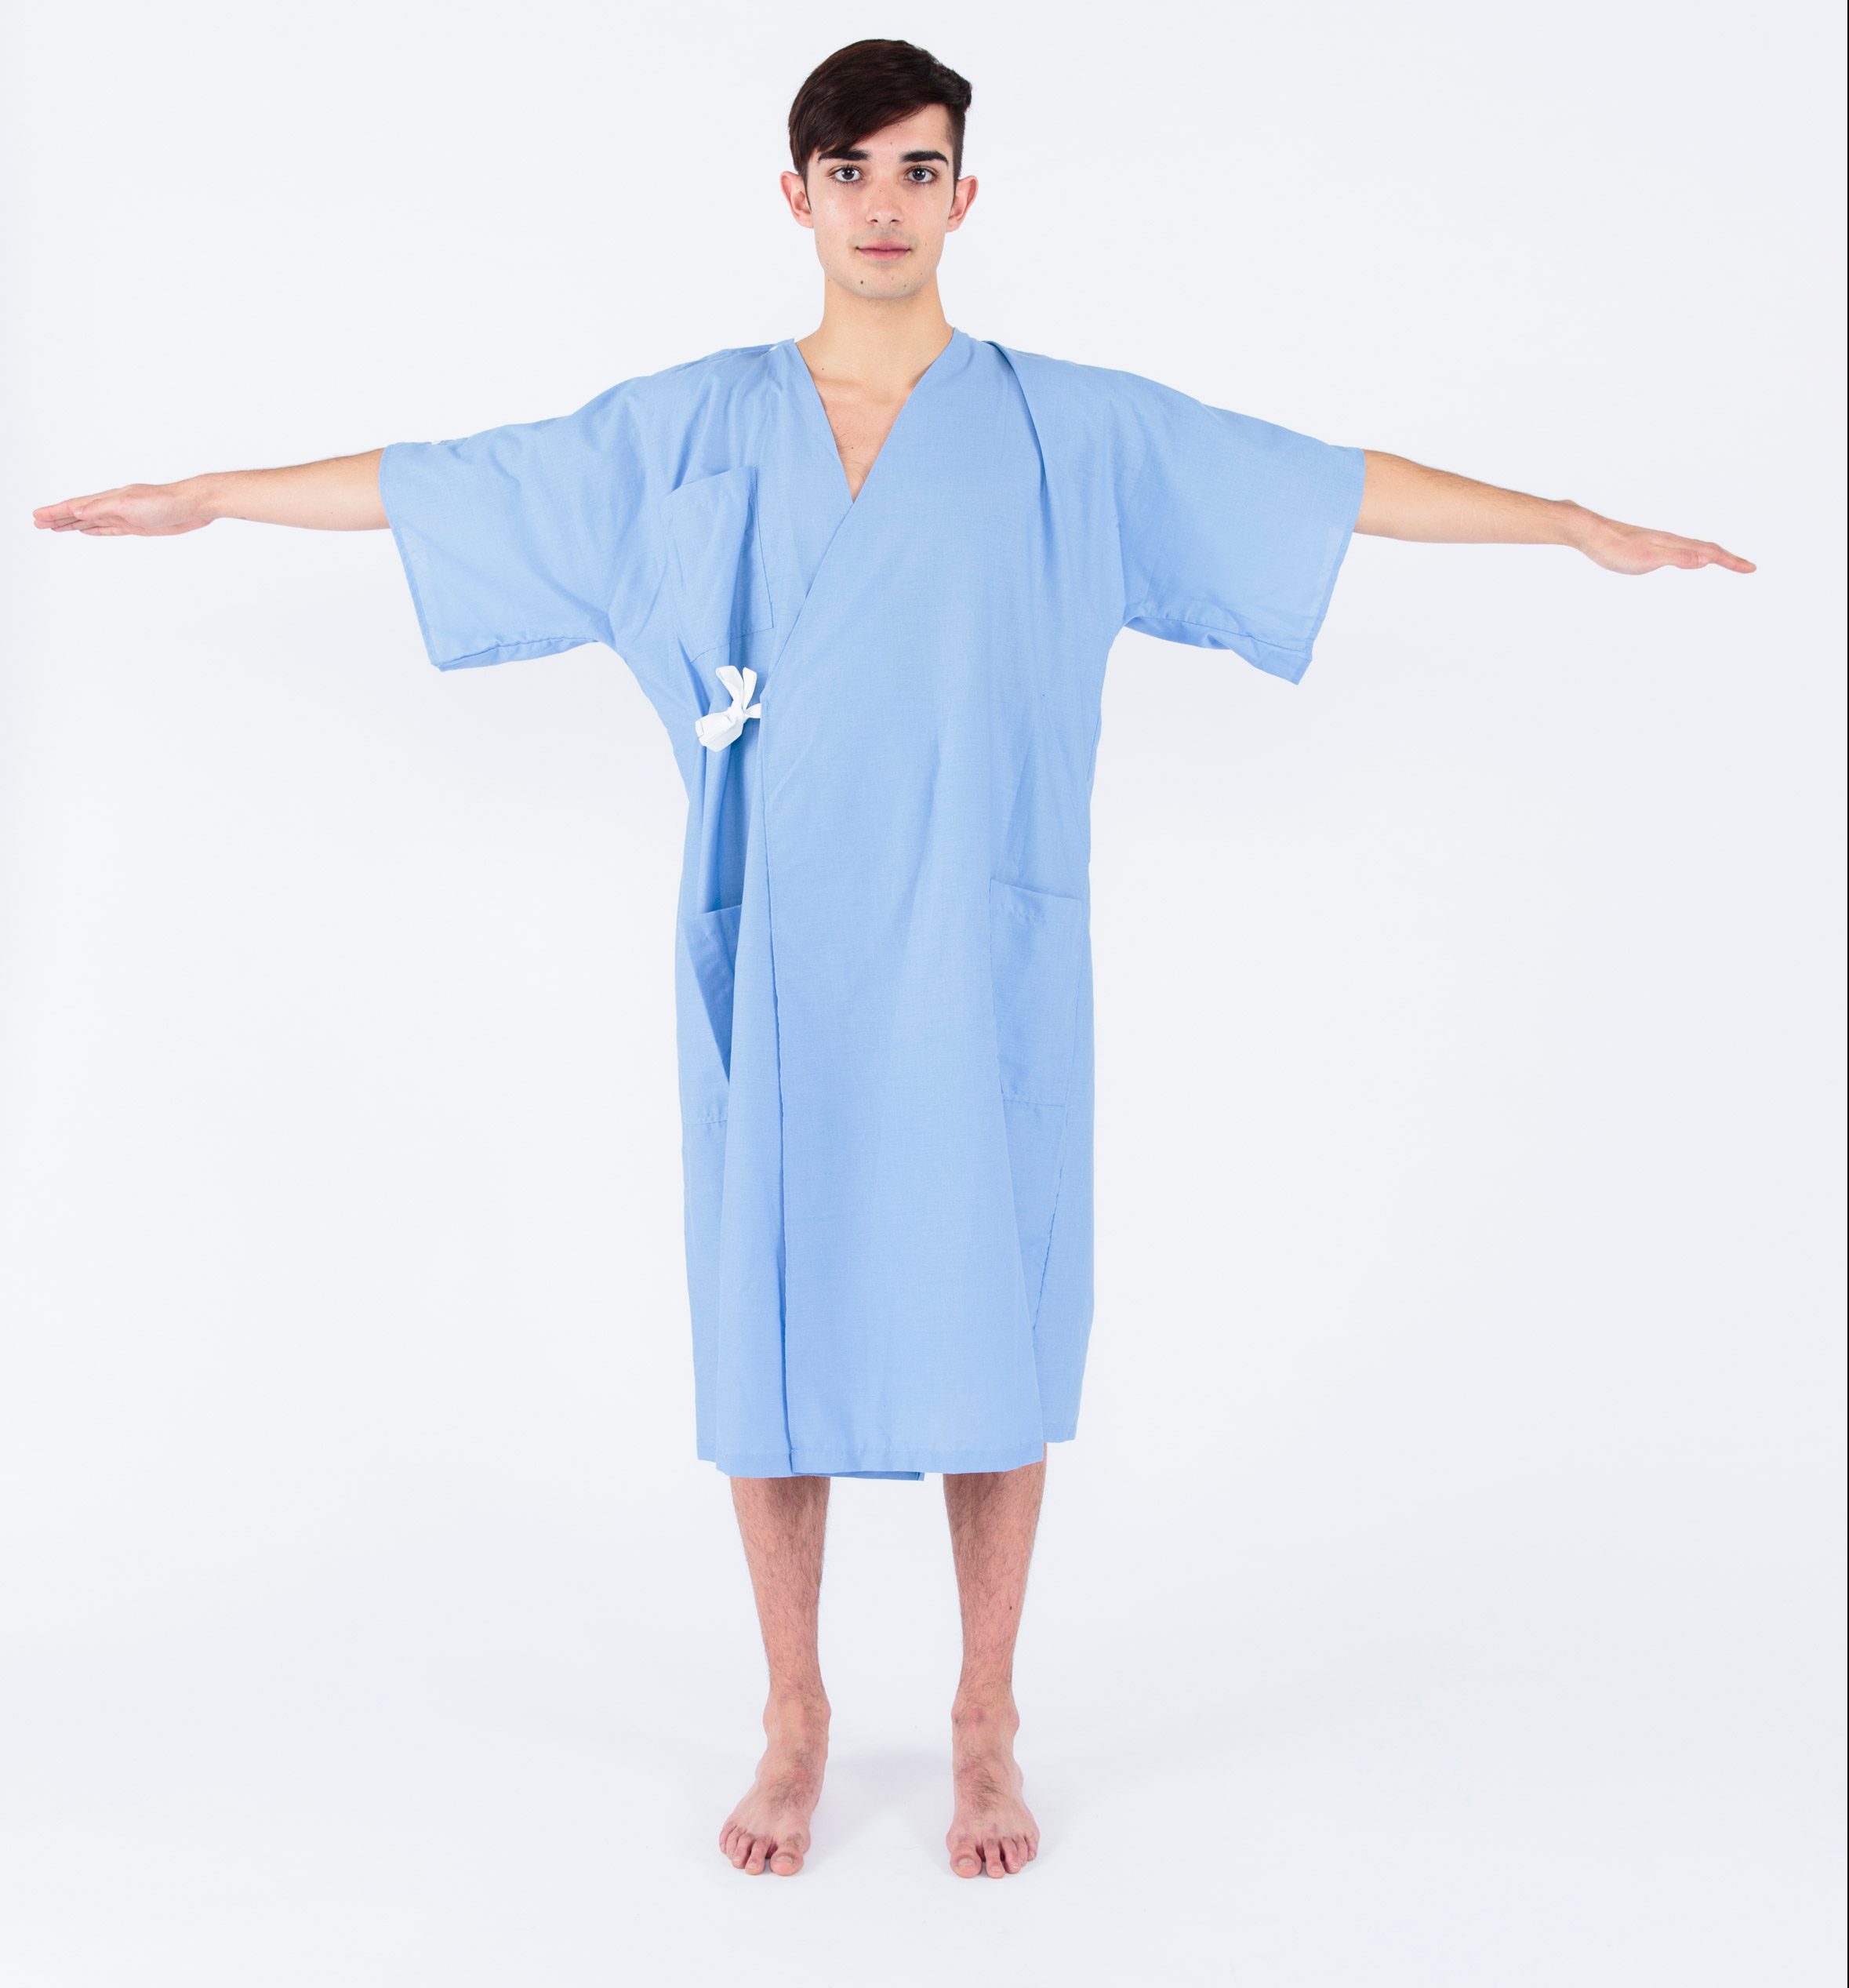 Parsons students partner with Care + Wear to redesign the hospital gown